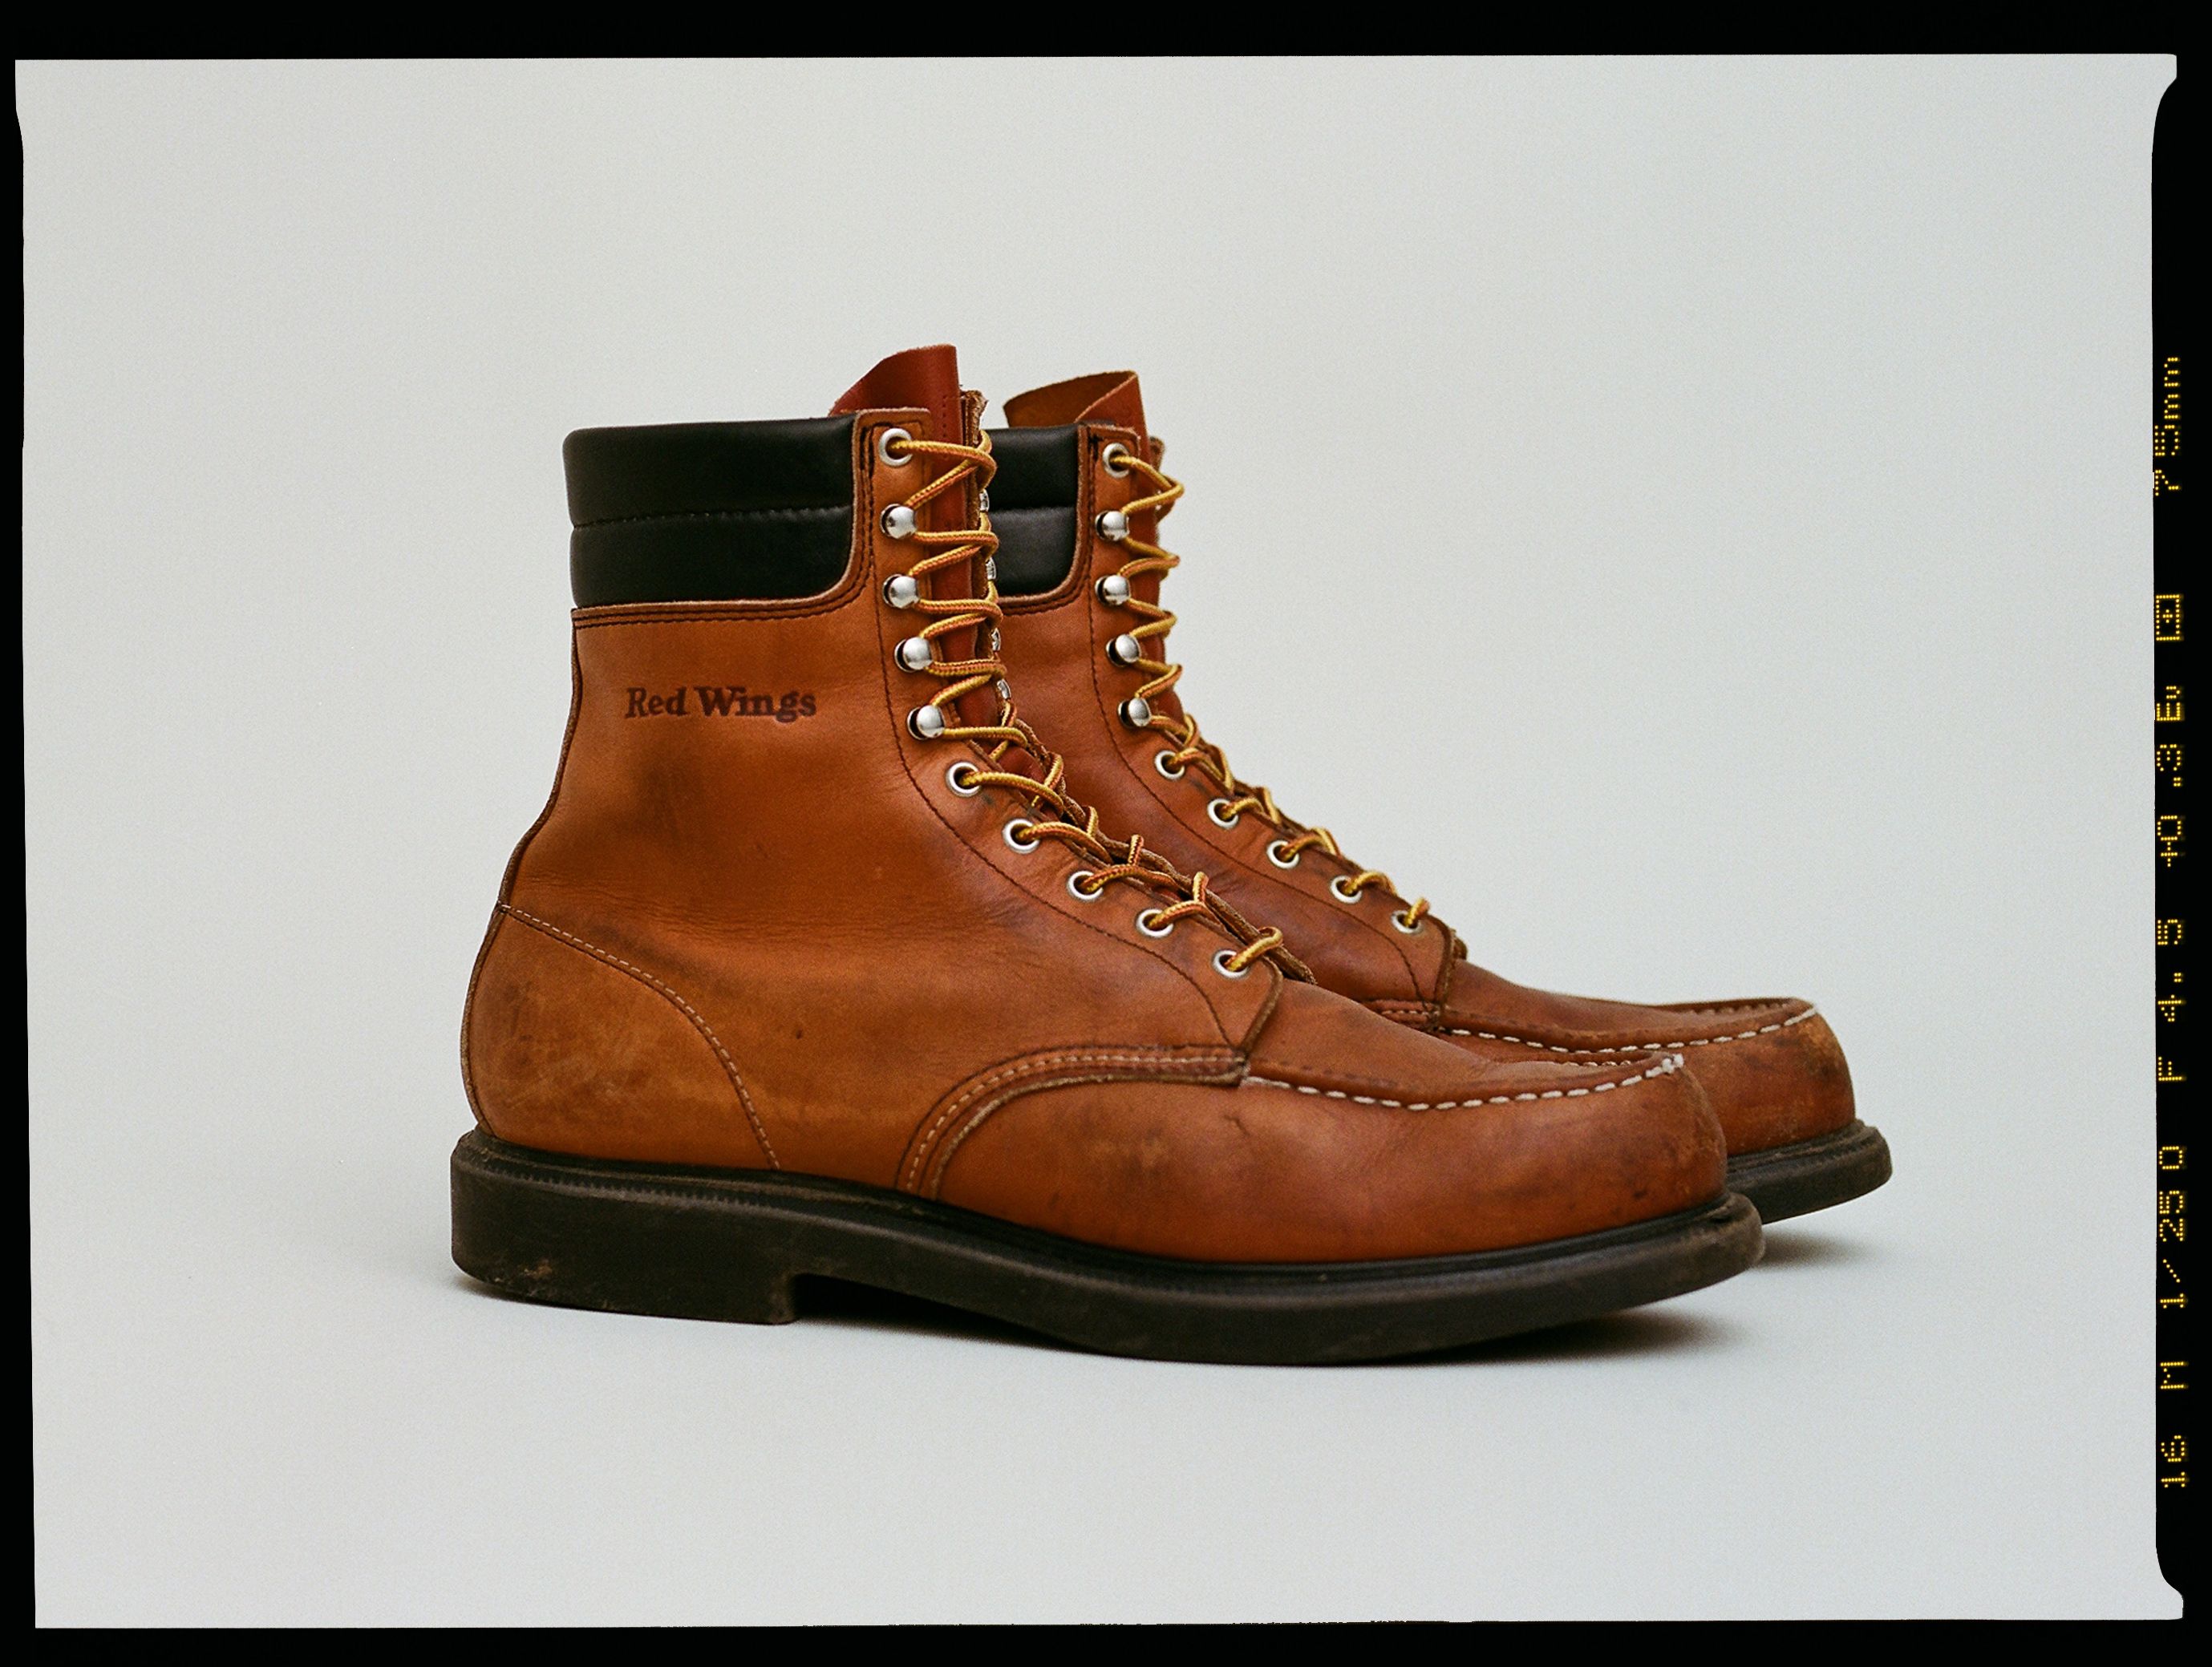 Red Wing's Newest Collection Isn't New at All. It's Refurbished